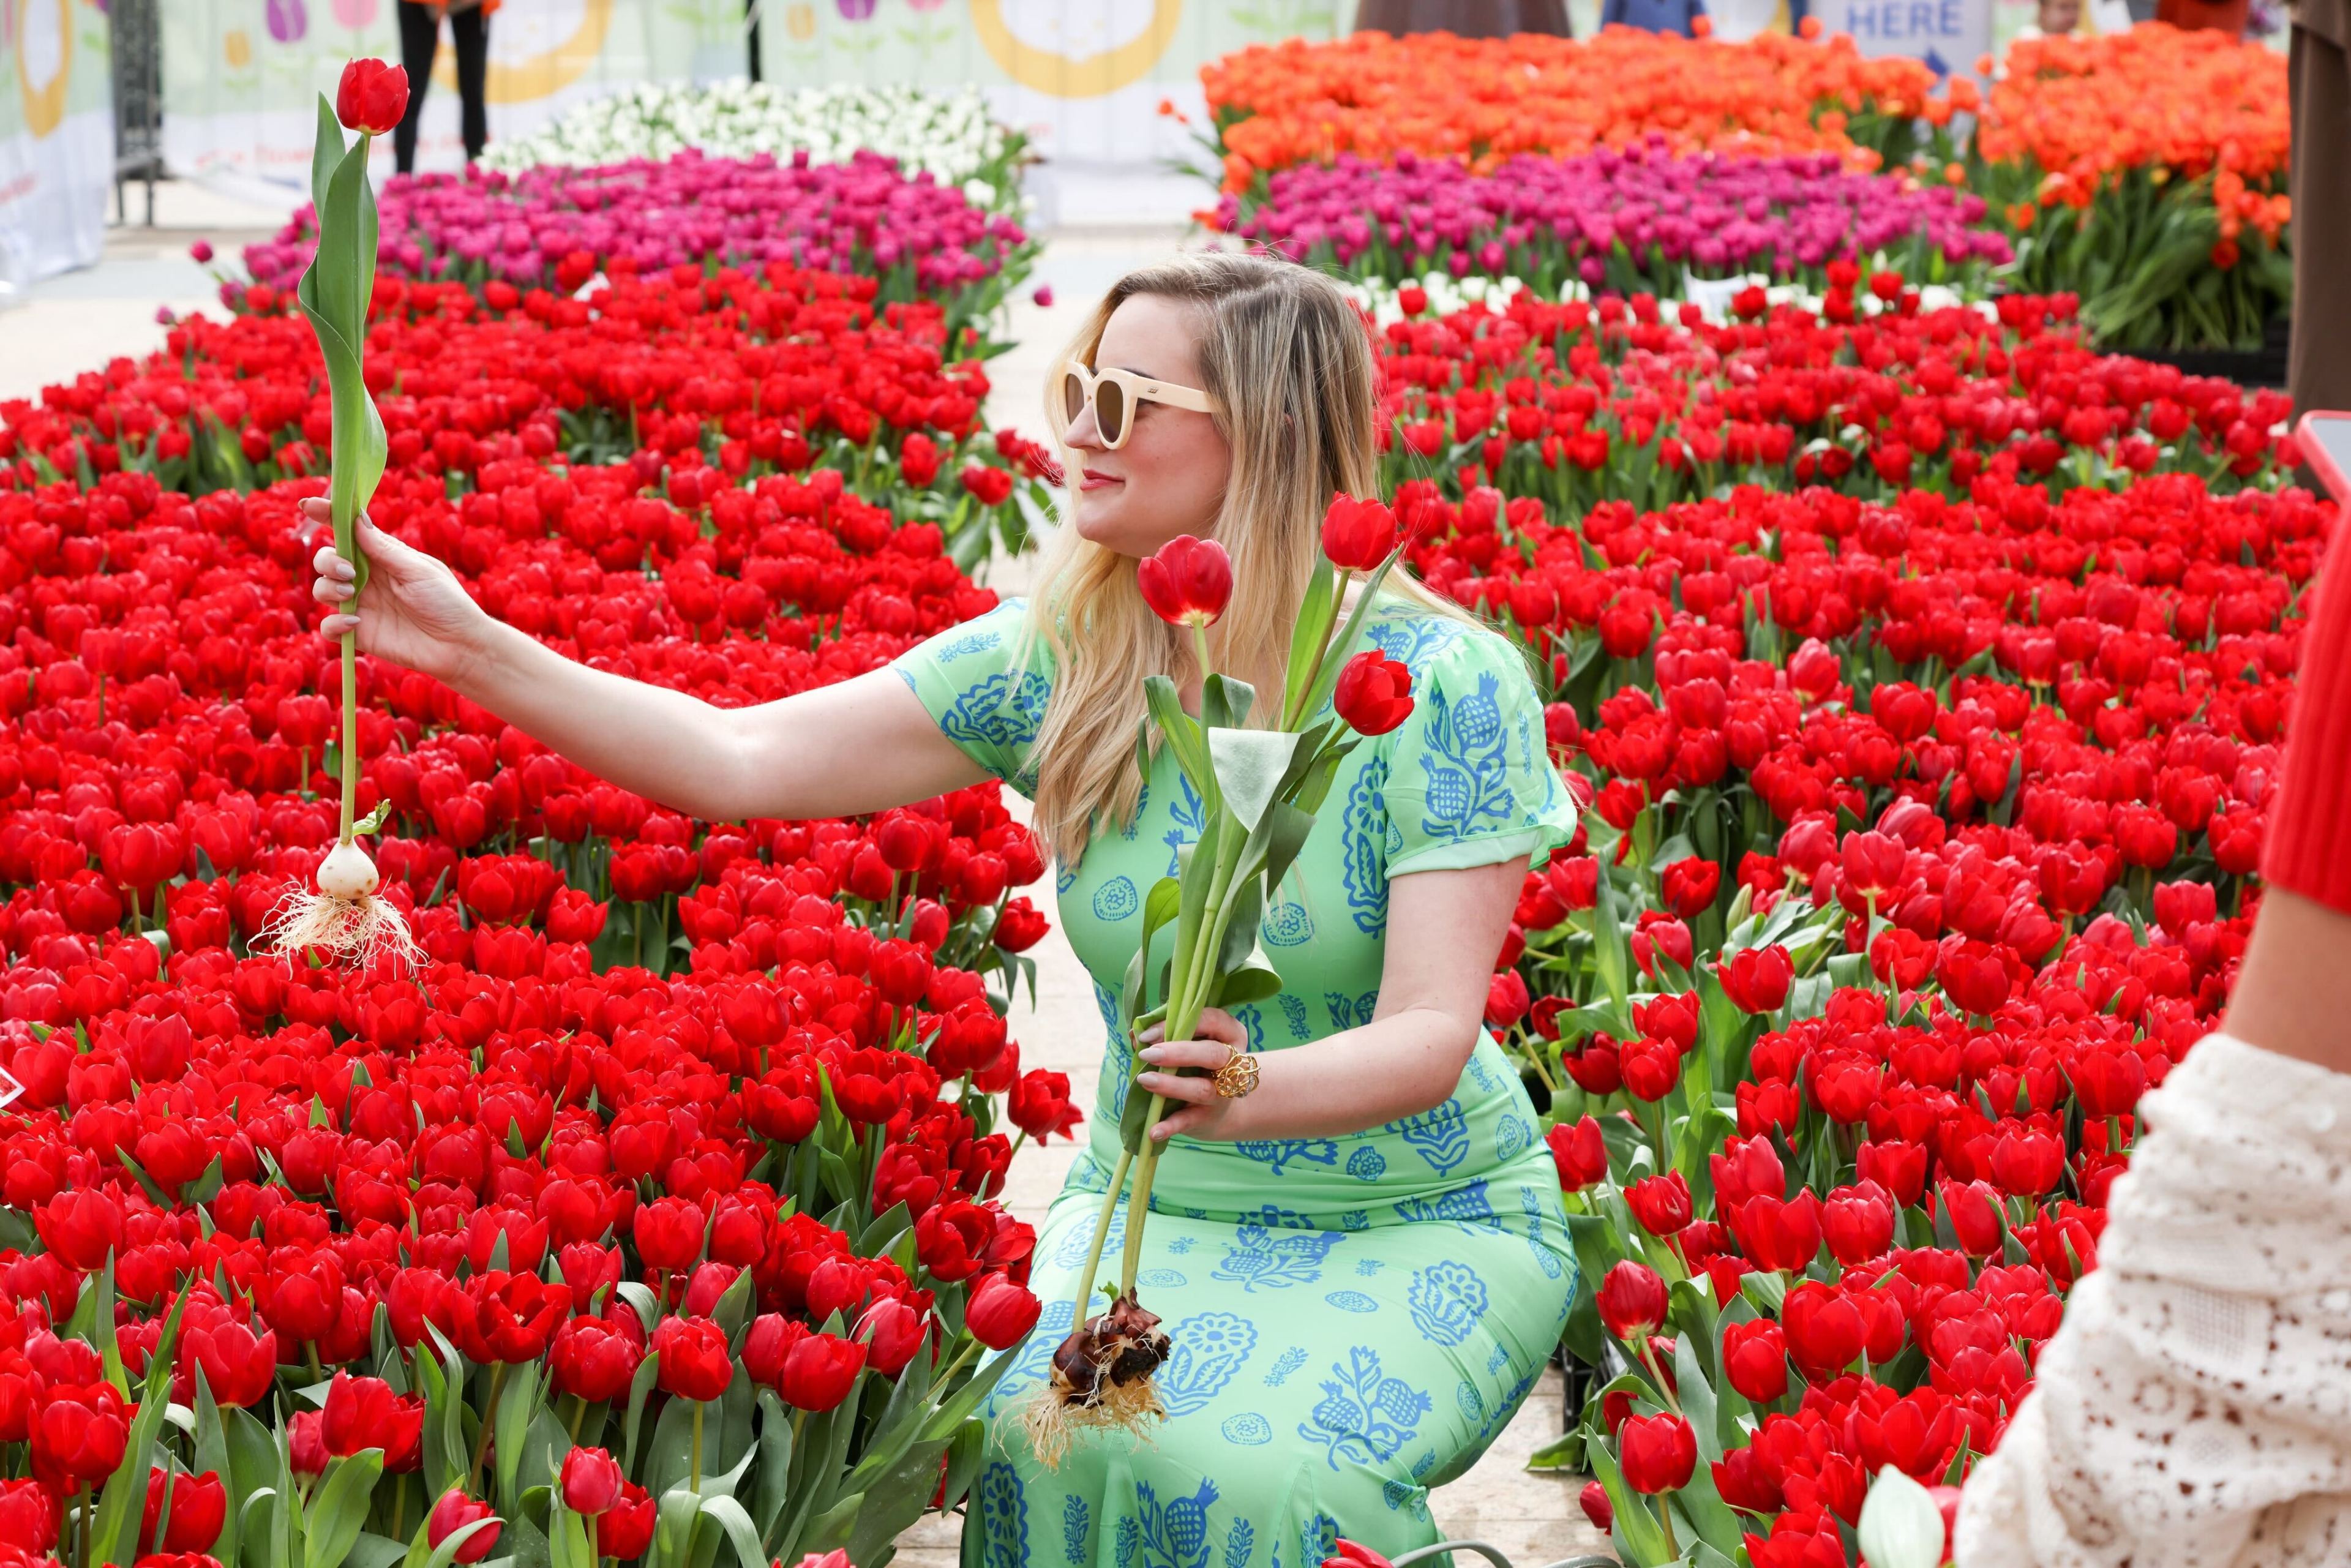 A woman in sunglasses sits among vibrant red tulips, holding one up to inspect it.